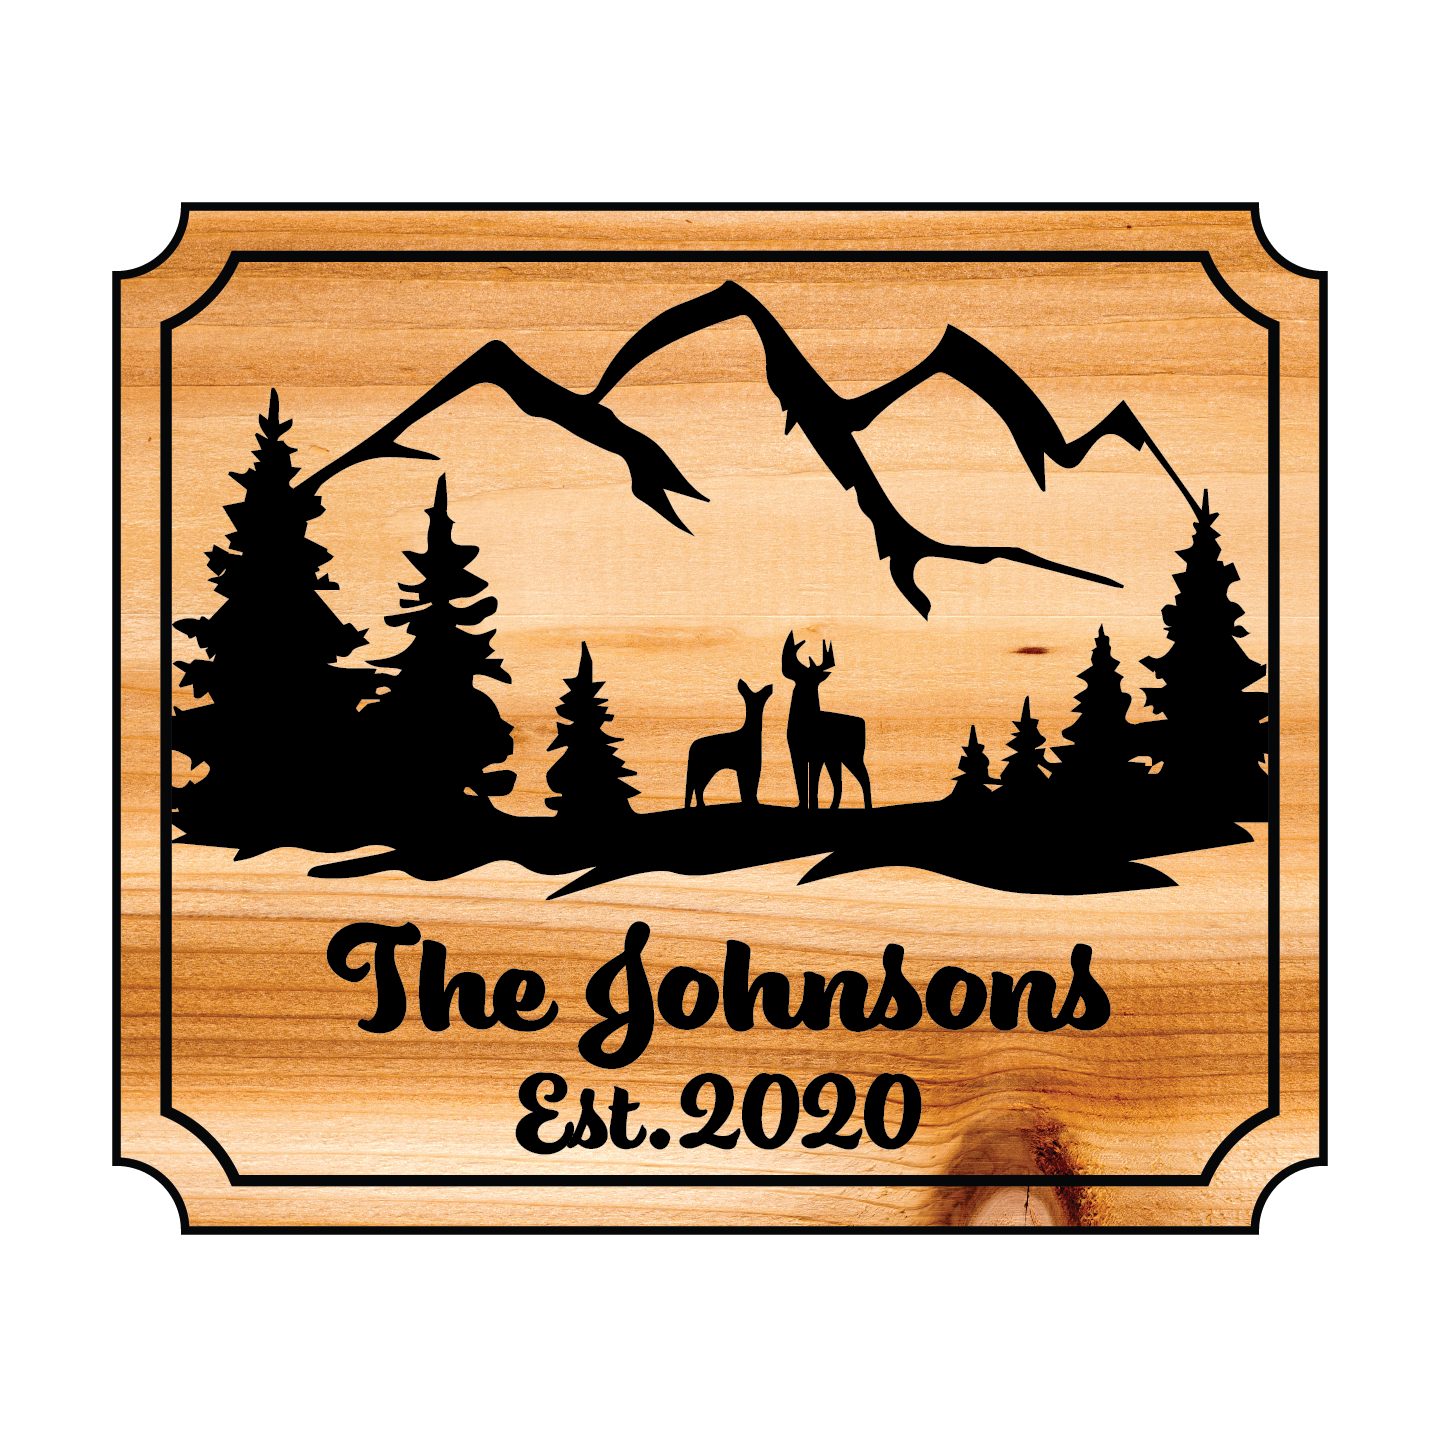 Carved/Engraved Personalized Wooden Sign - Woods, Mountains & Deer